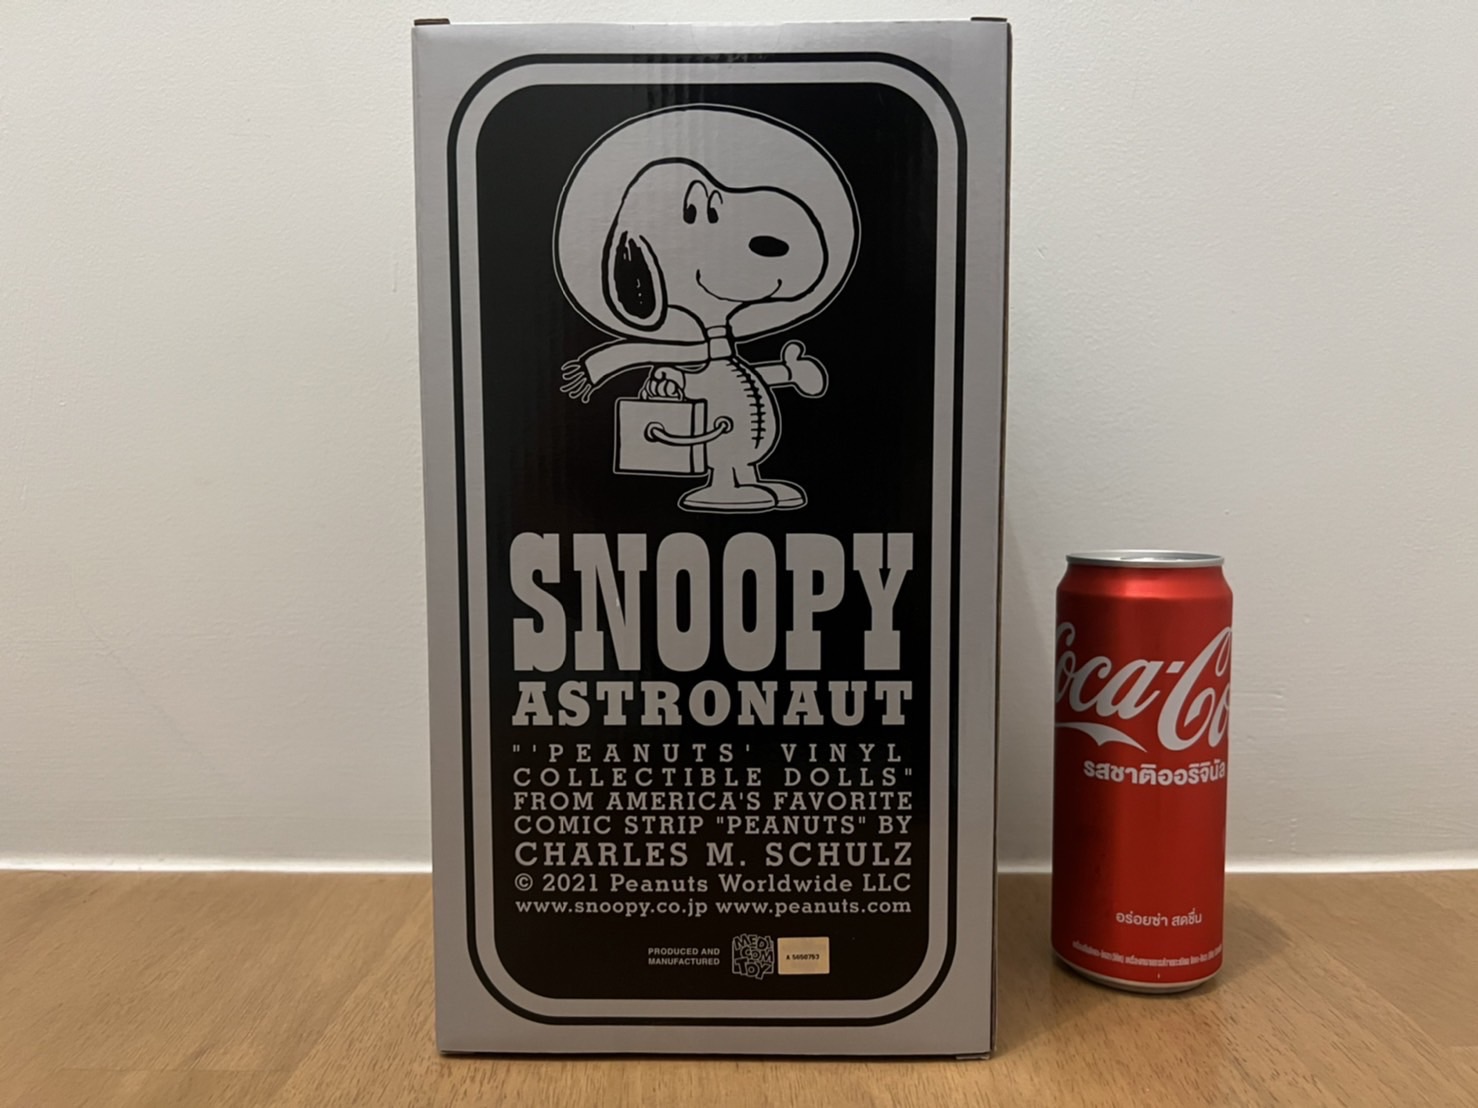 VCD SNOOPY (ASTRONAUT VINTAGE SILVER Ver.) | Lazada.co.th